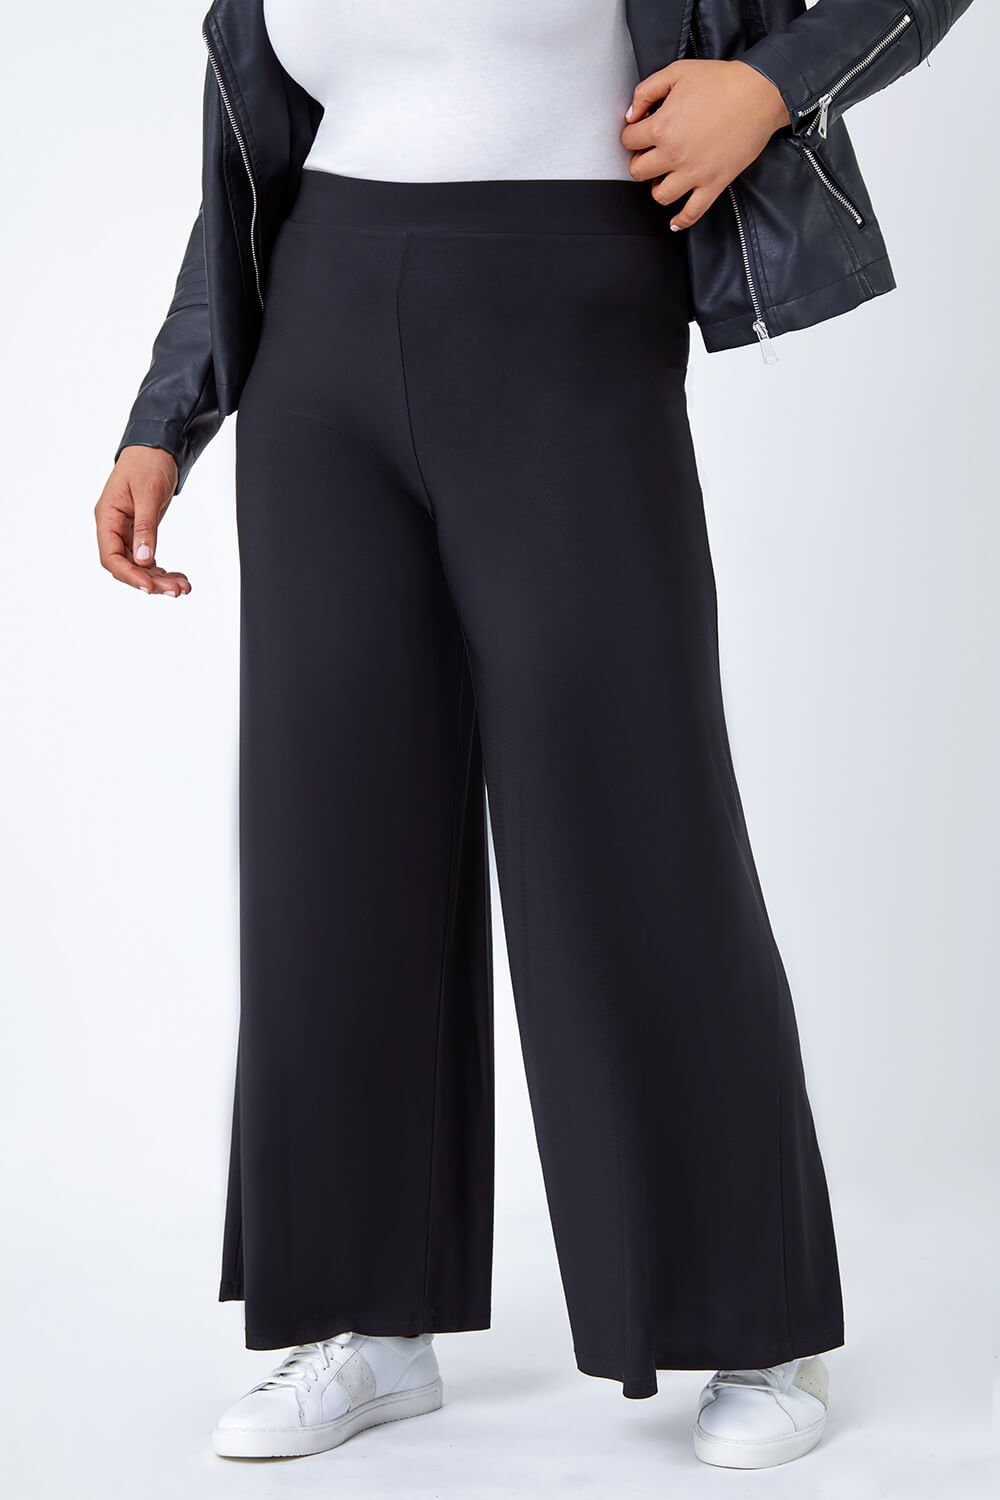 Black Curve Wide Leg Trousers, Image 4 of 5